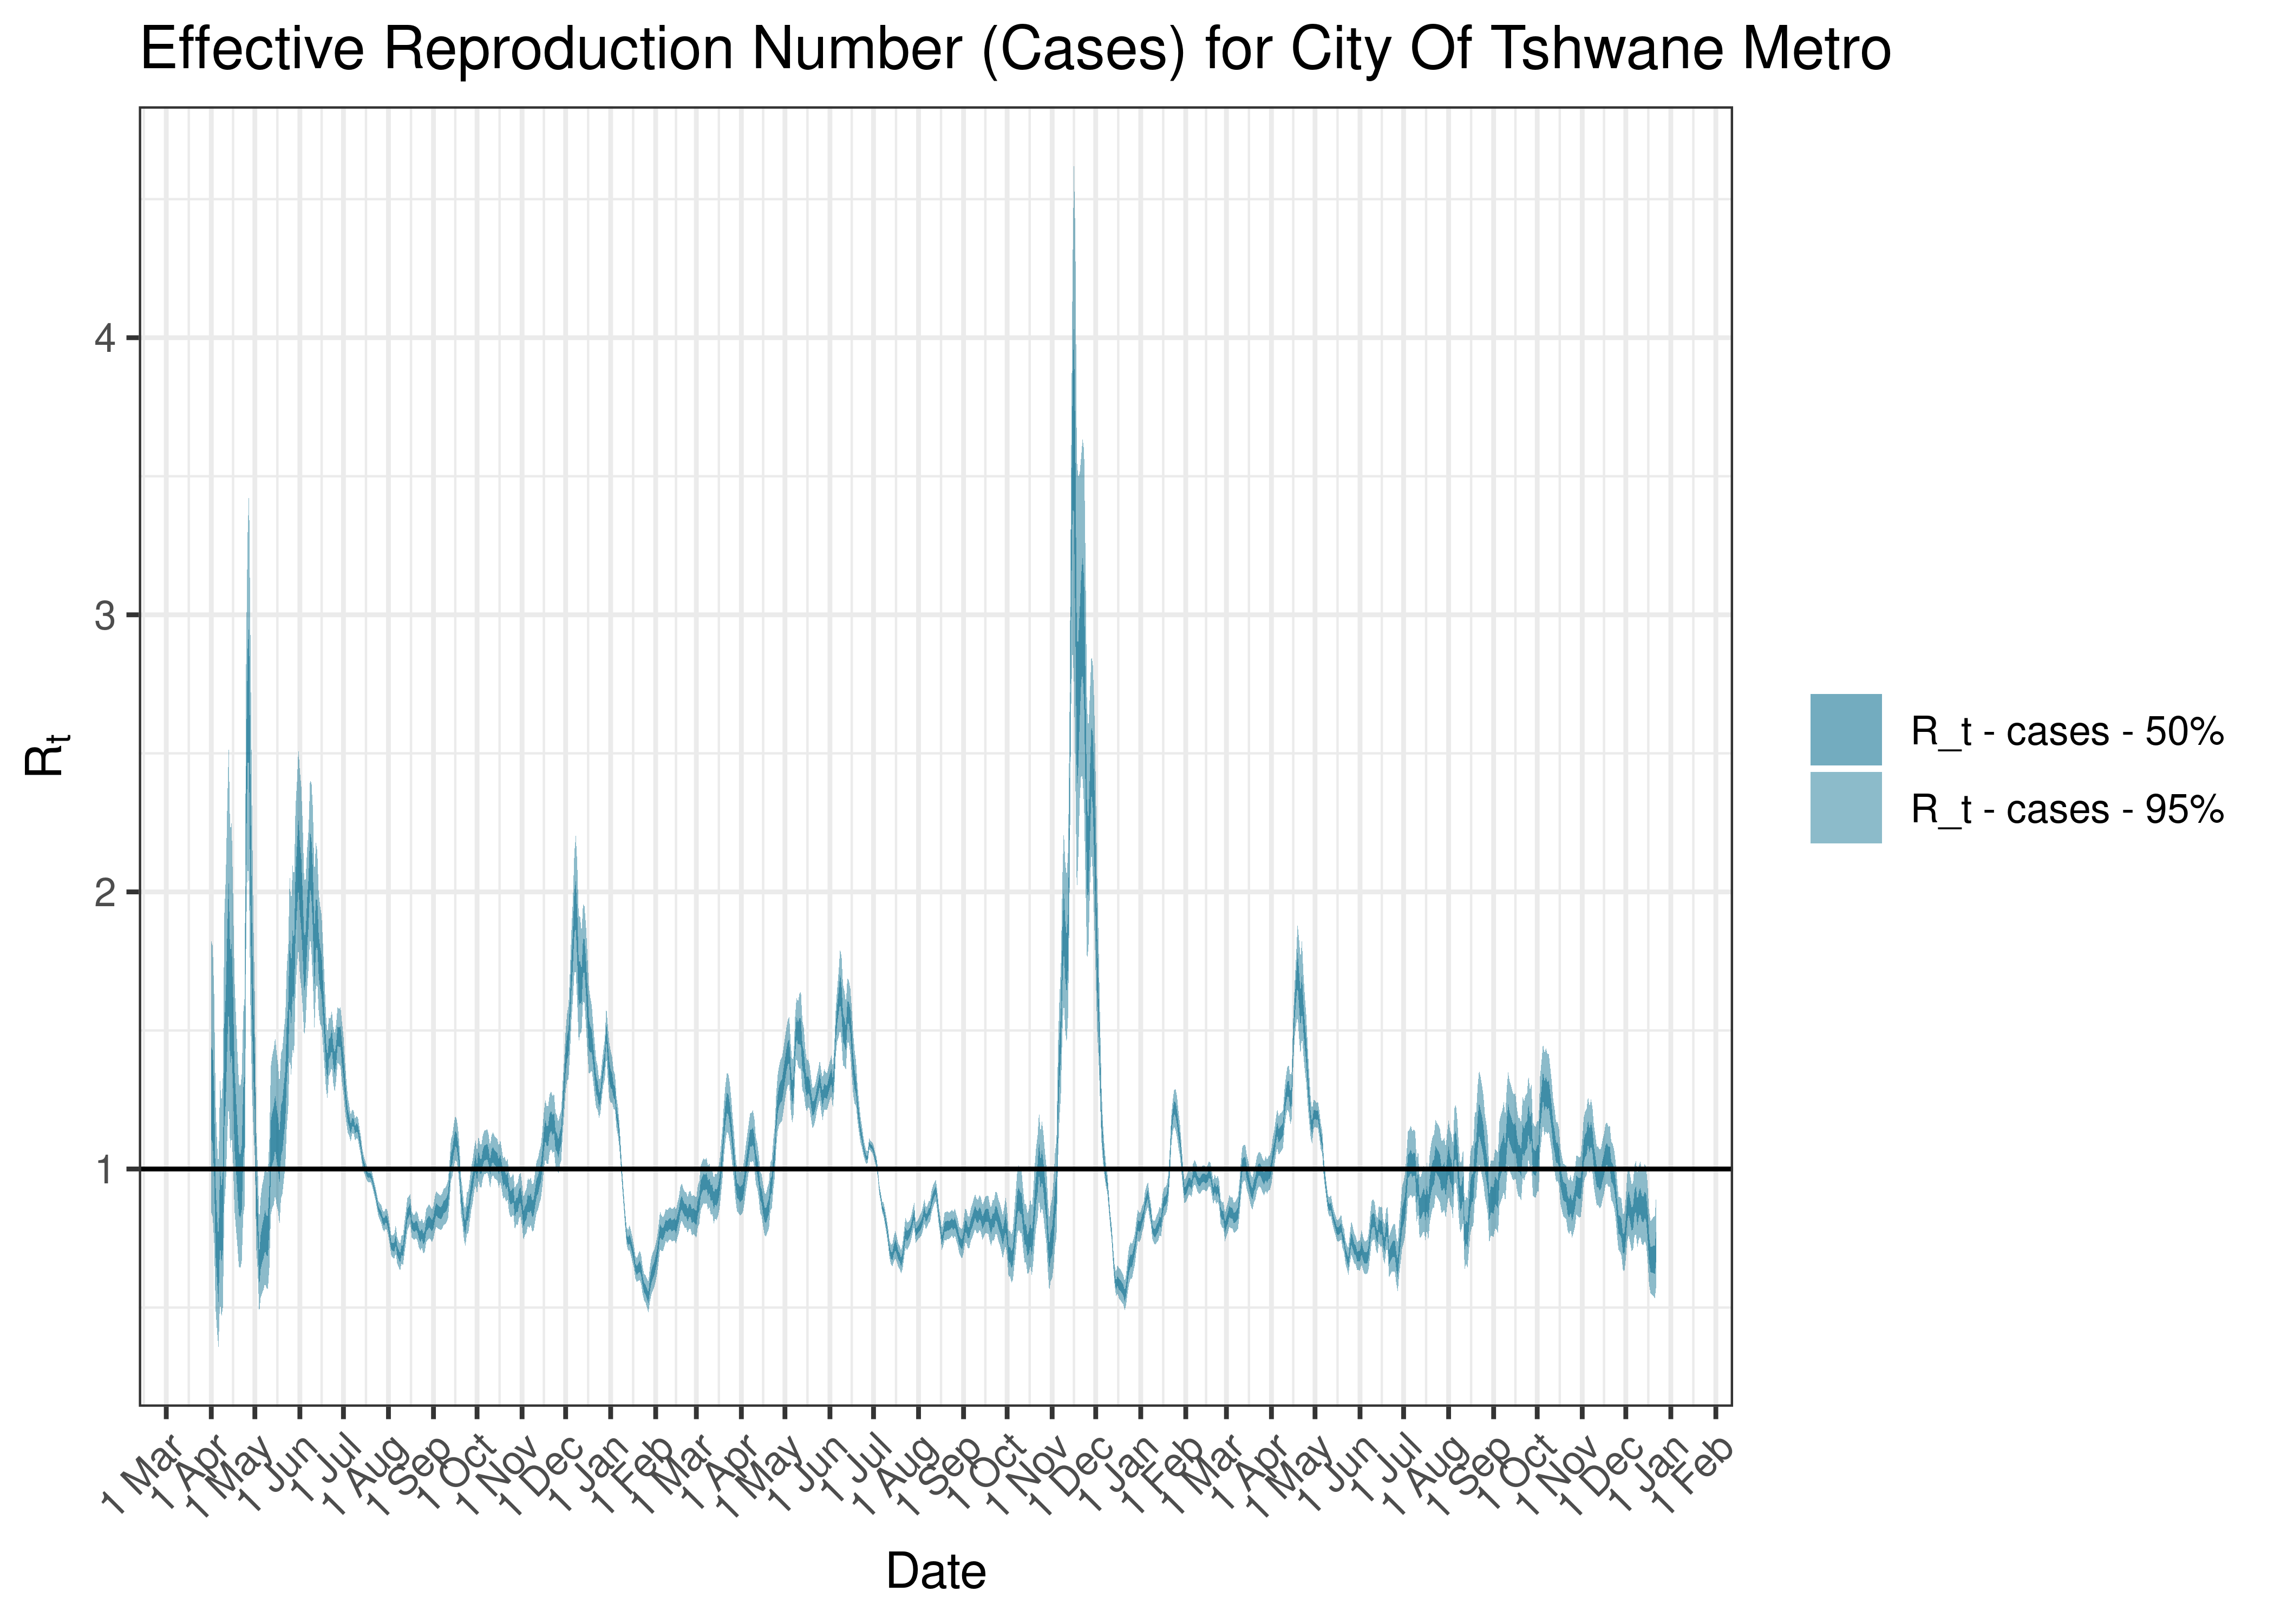 Estimated Effective Reproduction Number Based on Cases for City Of Tshwane Metro since 1 April 2020